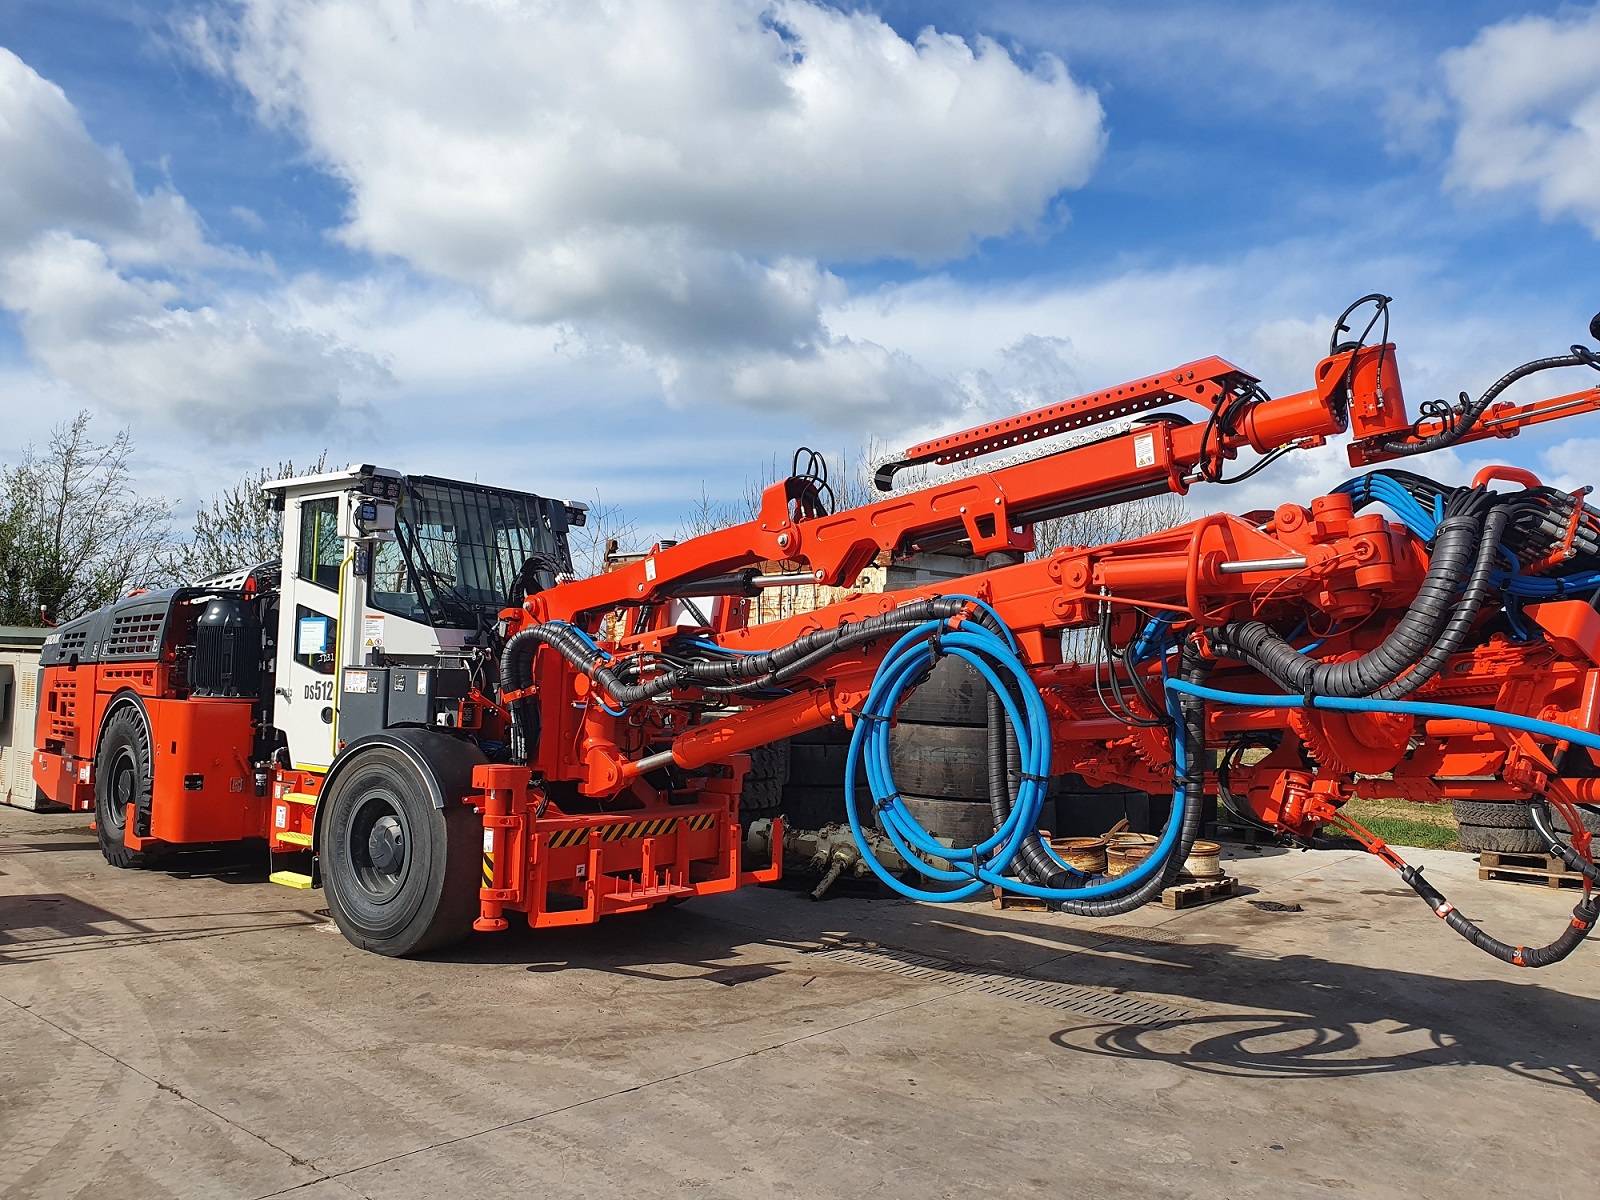 Sandvik Ds512i Bolter Zero Hours Available Immediately Qme Global Mining And Tunnelling